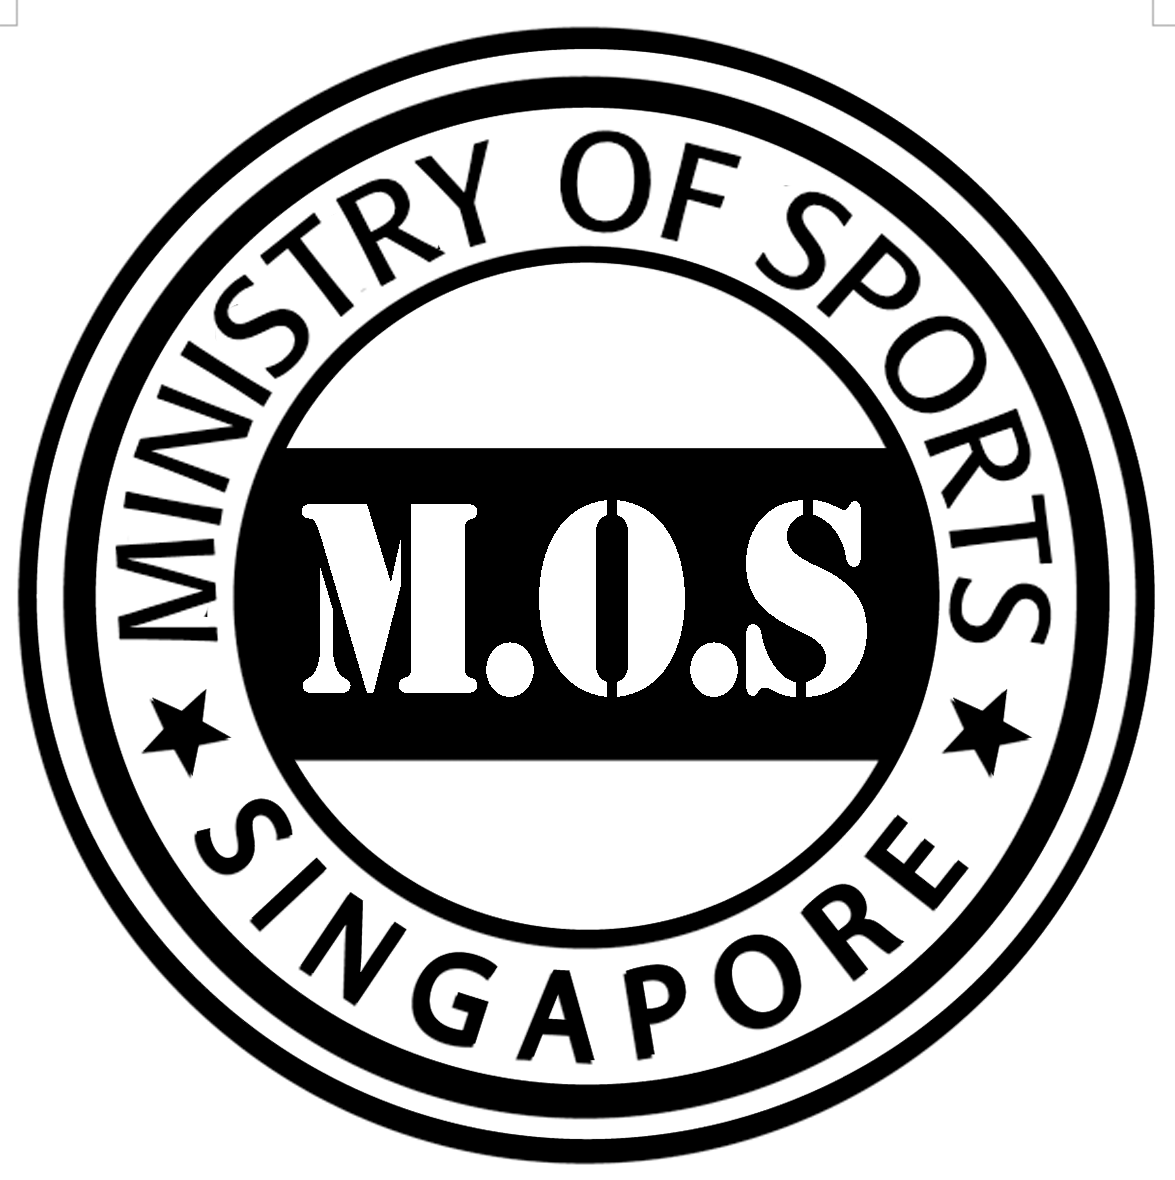 Ministry of Sports